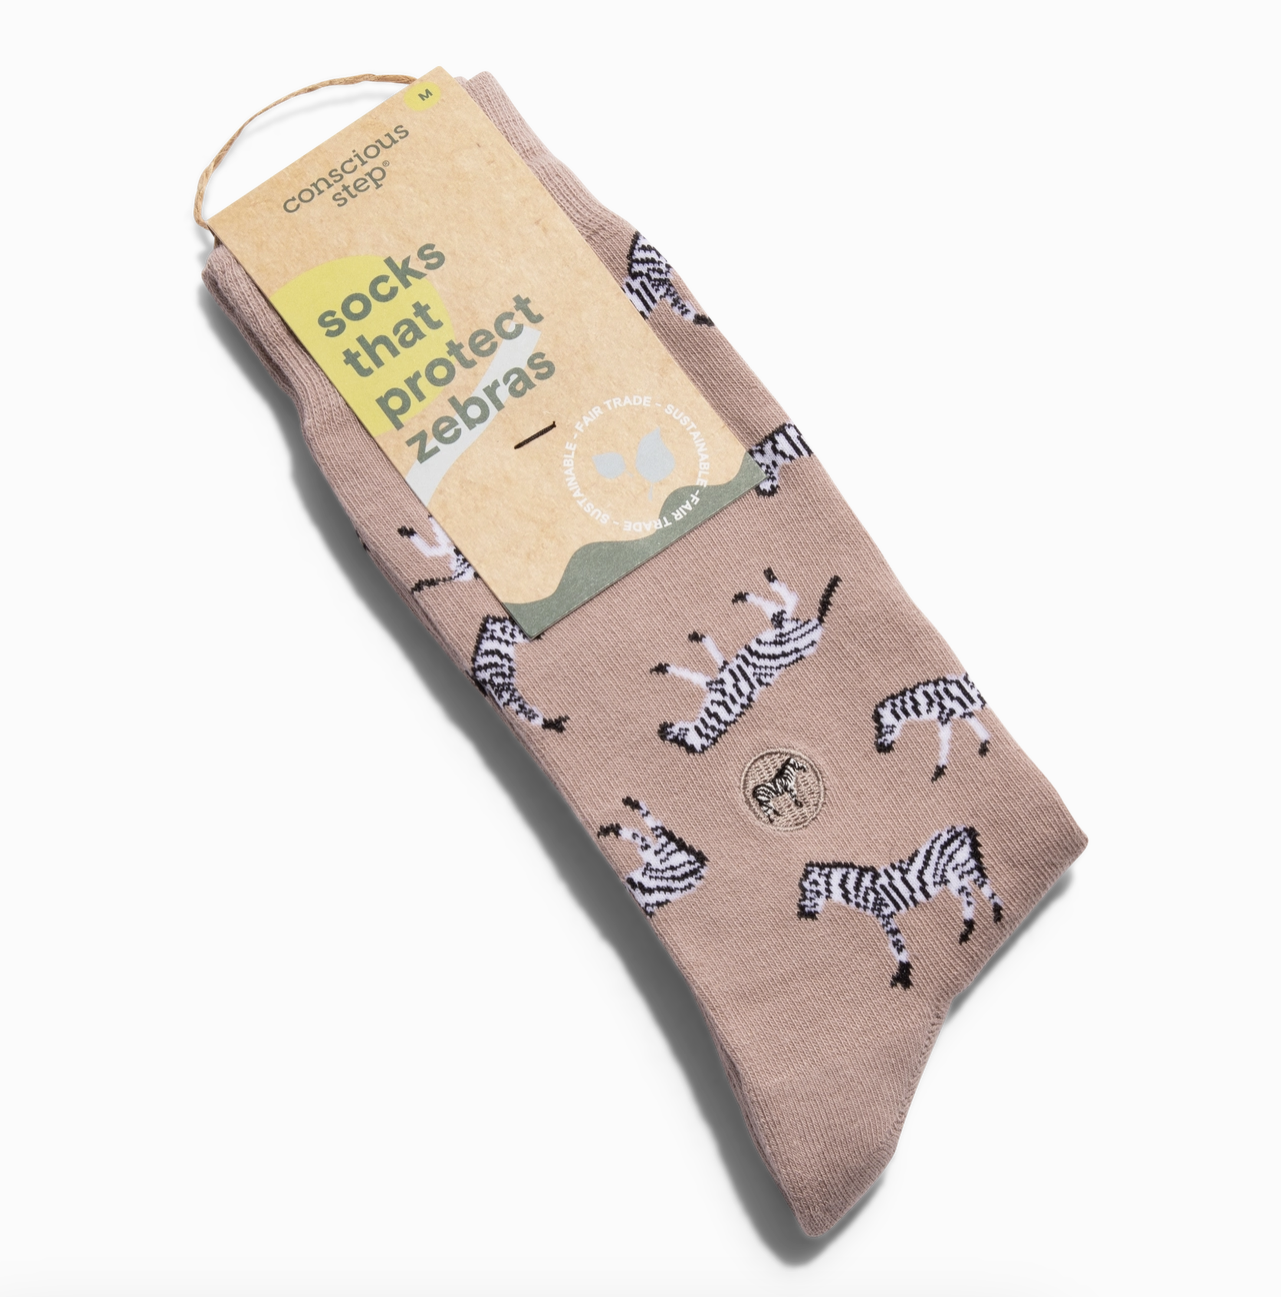 Conscious Step - Socks that Protect Zebras  Conscious Step   -better made easy-eco-friendly-sustainable-gifting